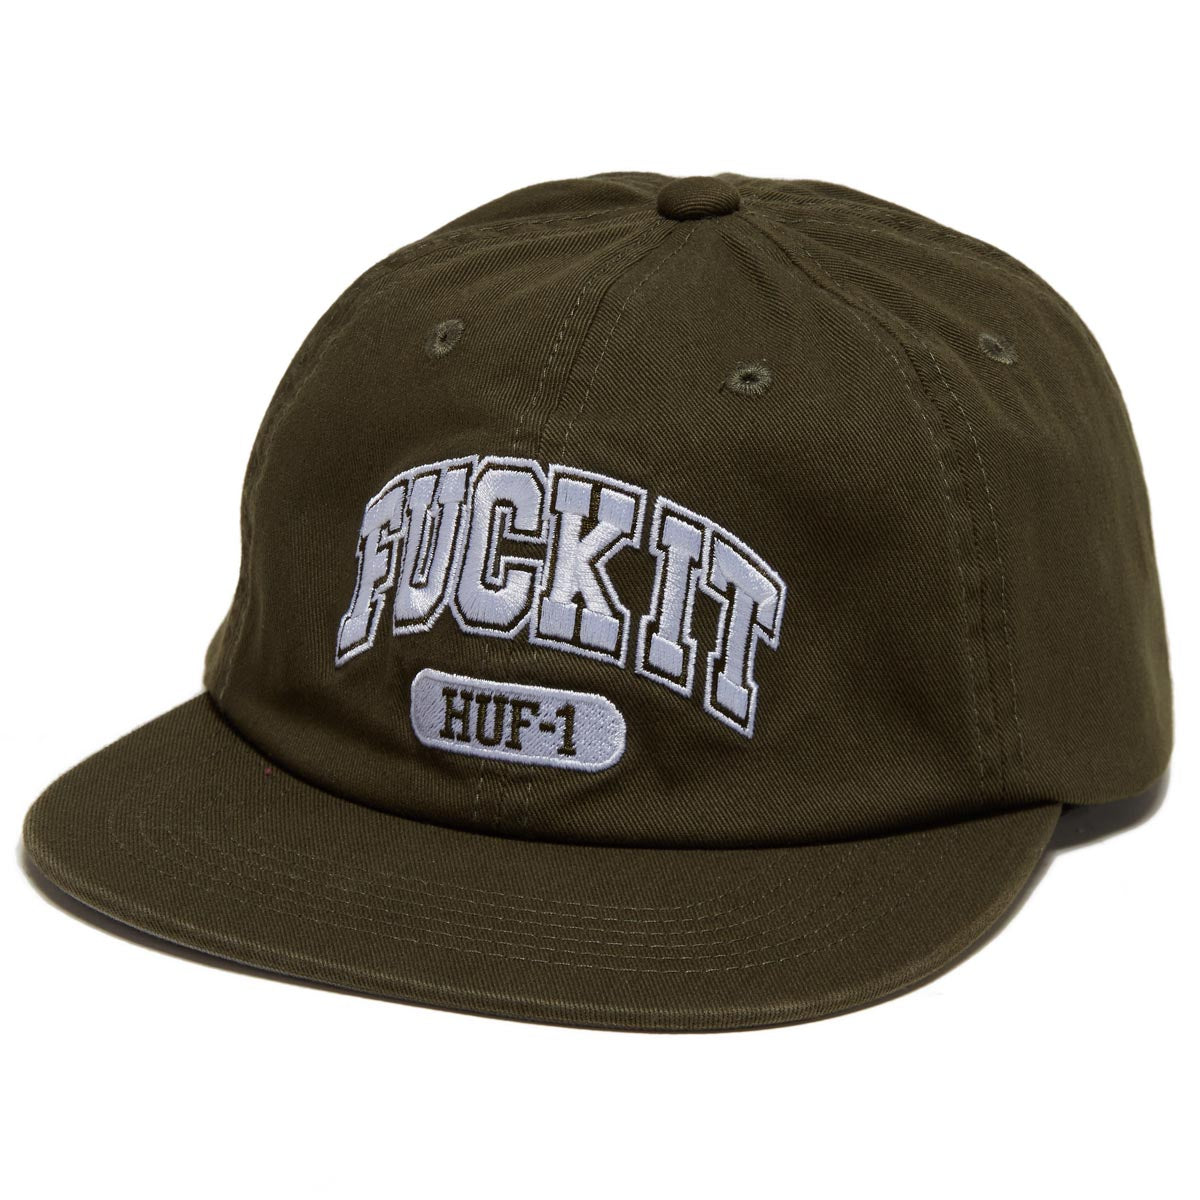 HUF Fuck It 6 Panel Hat - Dried Herb image 1